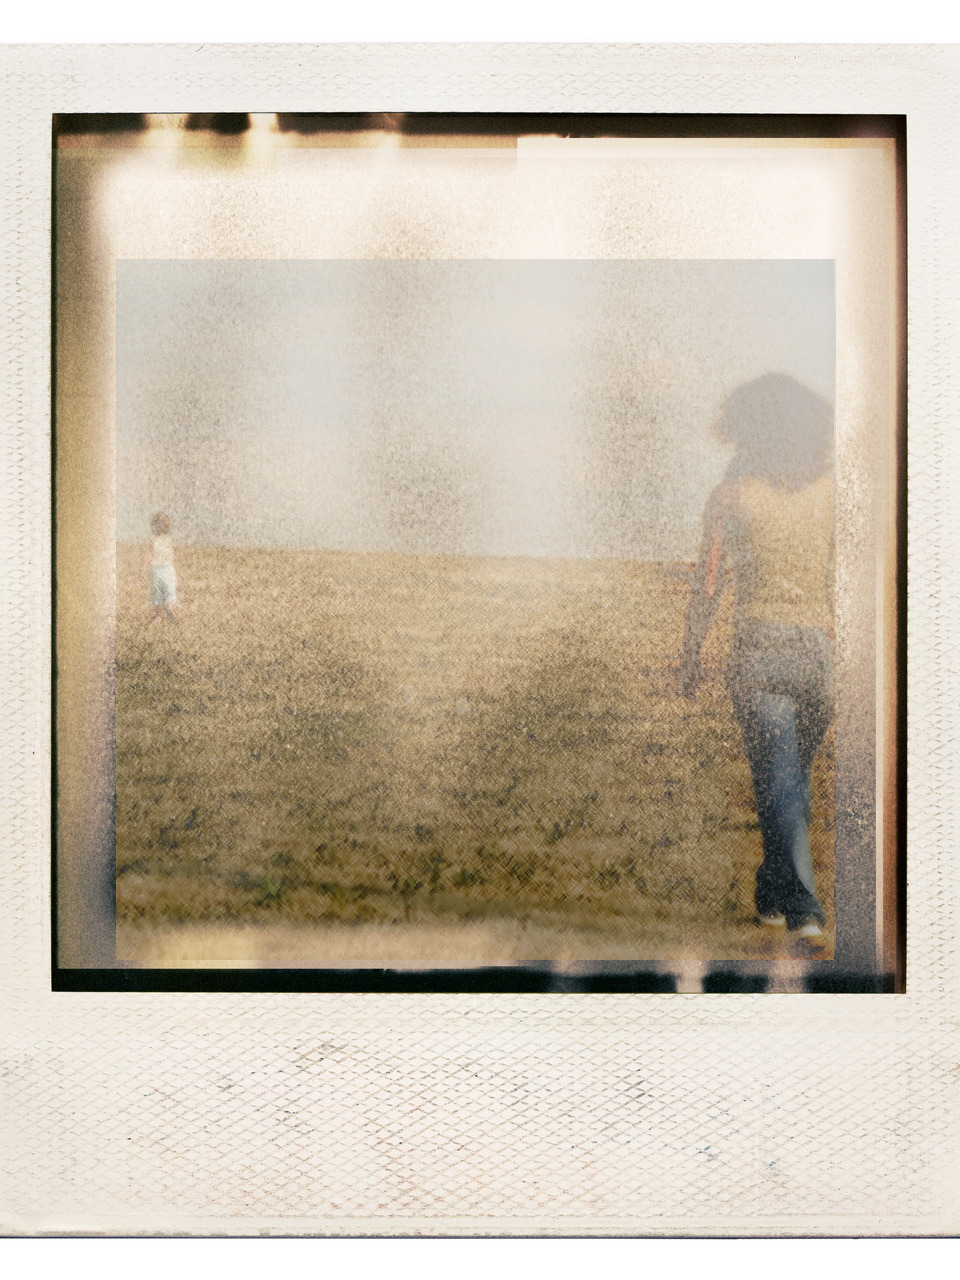 faded polariod with mother walking in foreground toward small child a ways away in the background